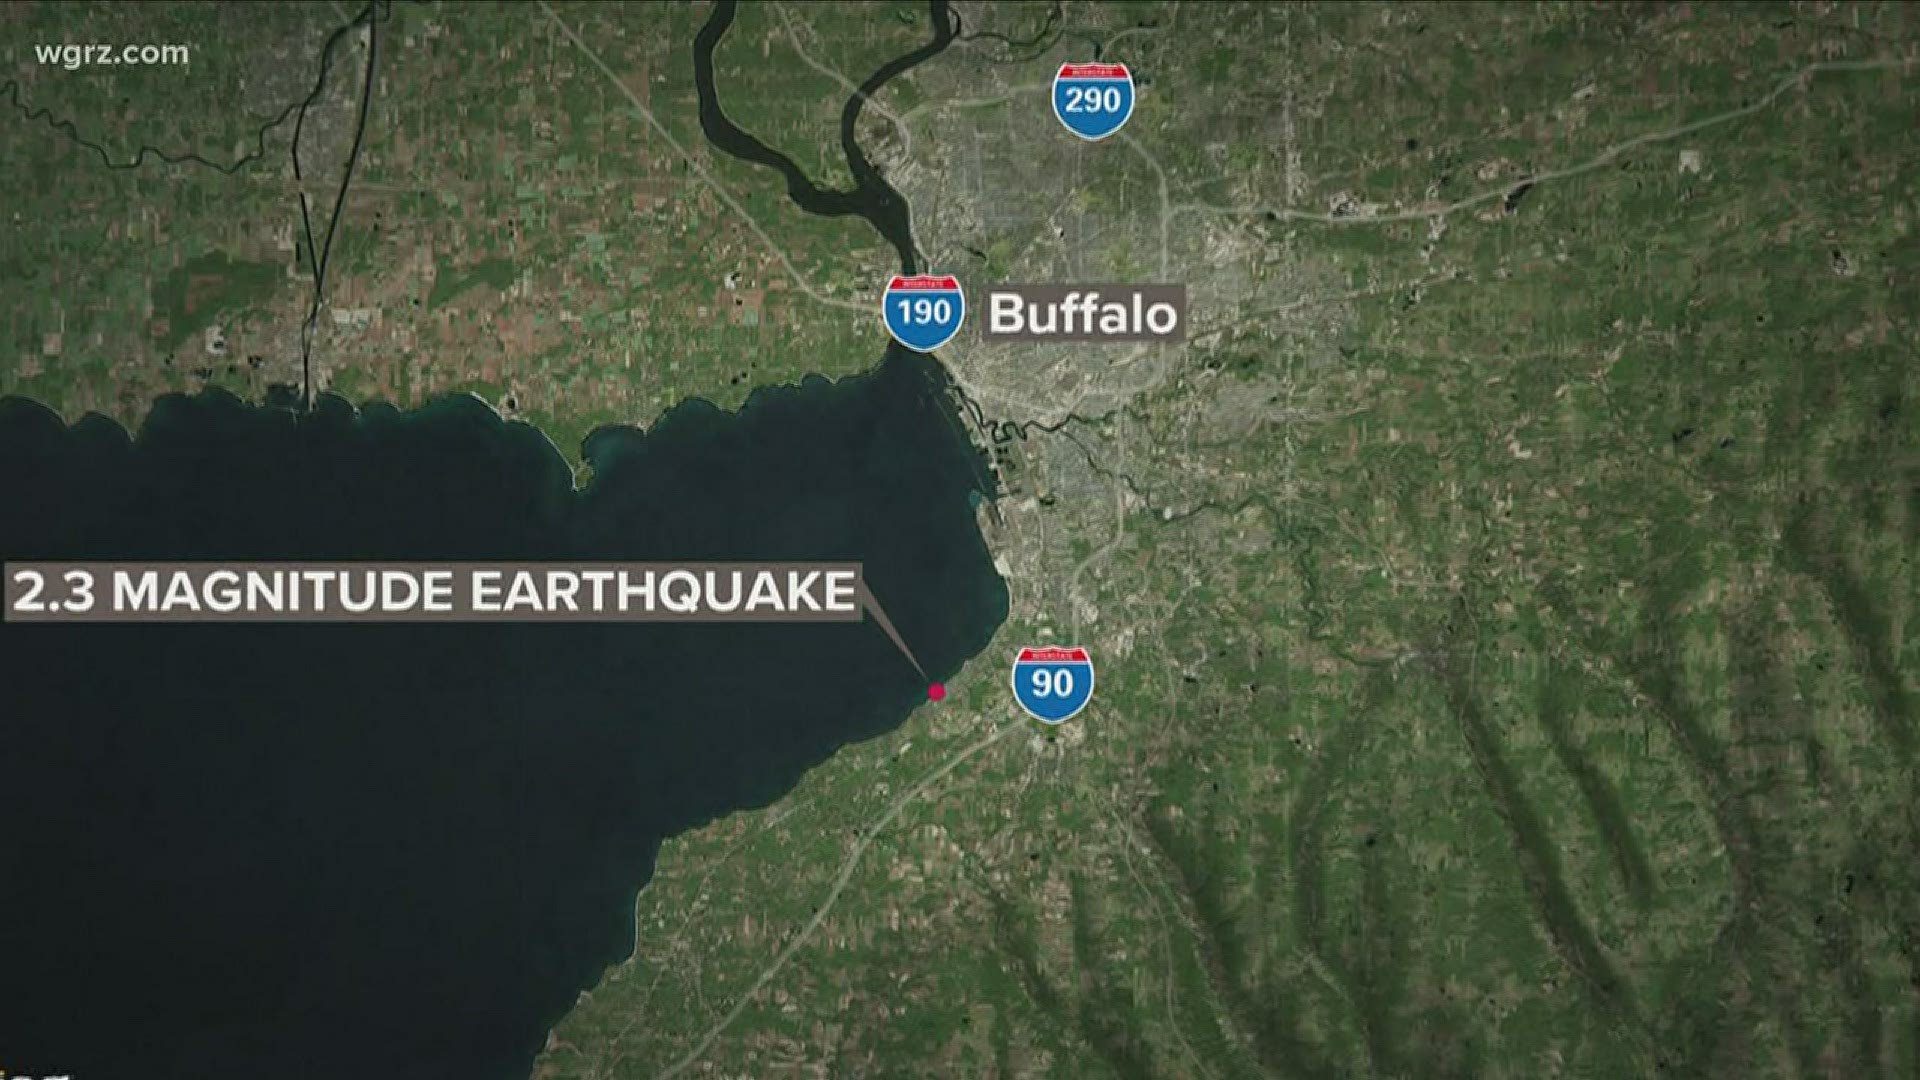 We heard from a few people about a loud boom south of the city. The US Geological survey says there was a 2.3 magnitude quake centered down along the Hamburg shore.